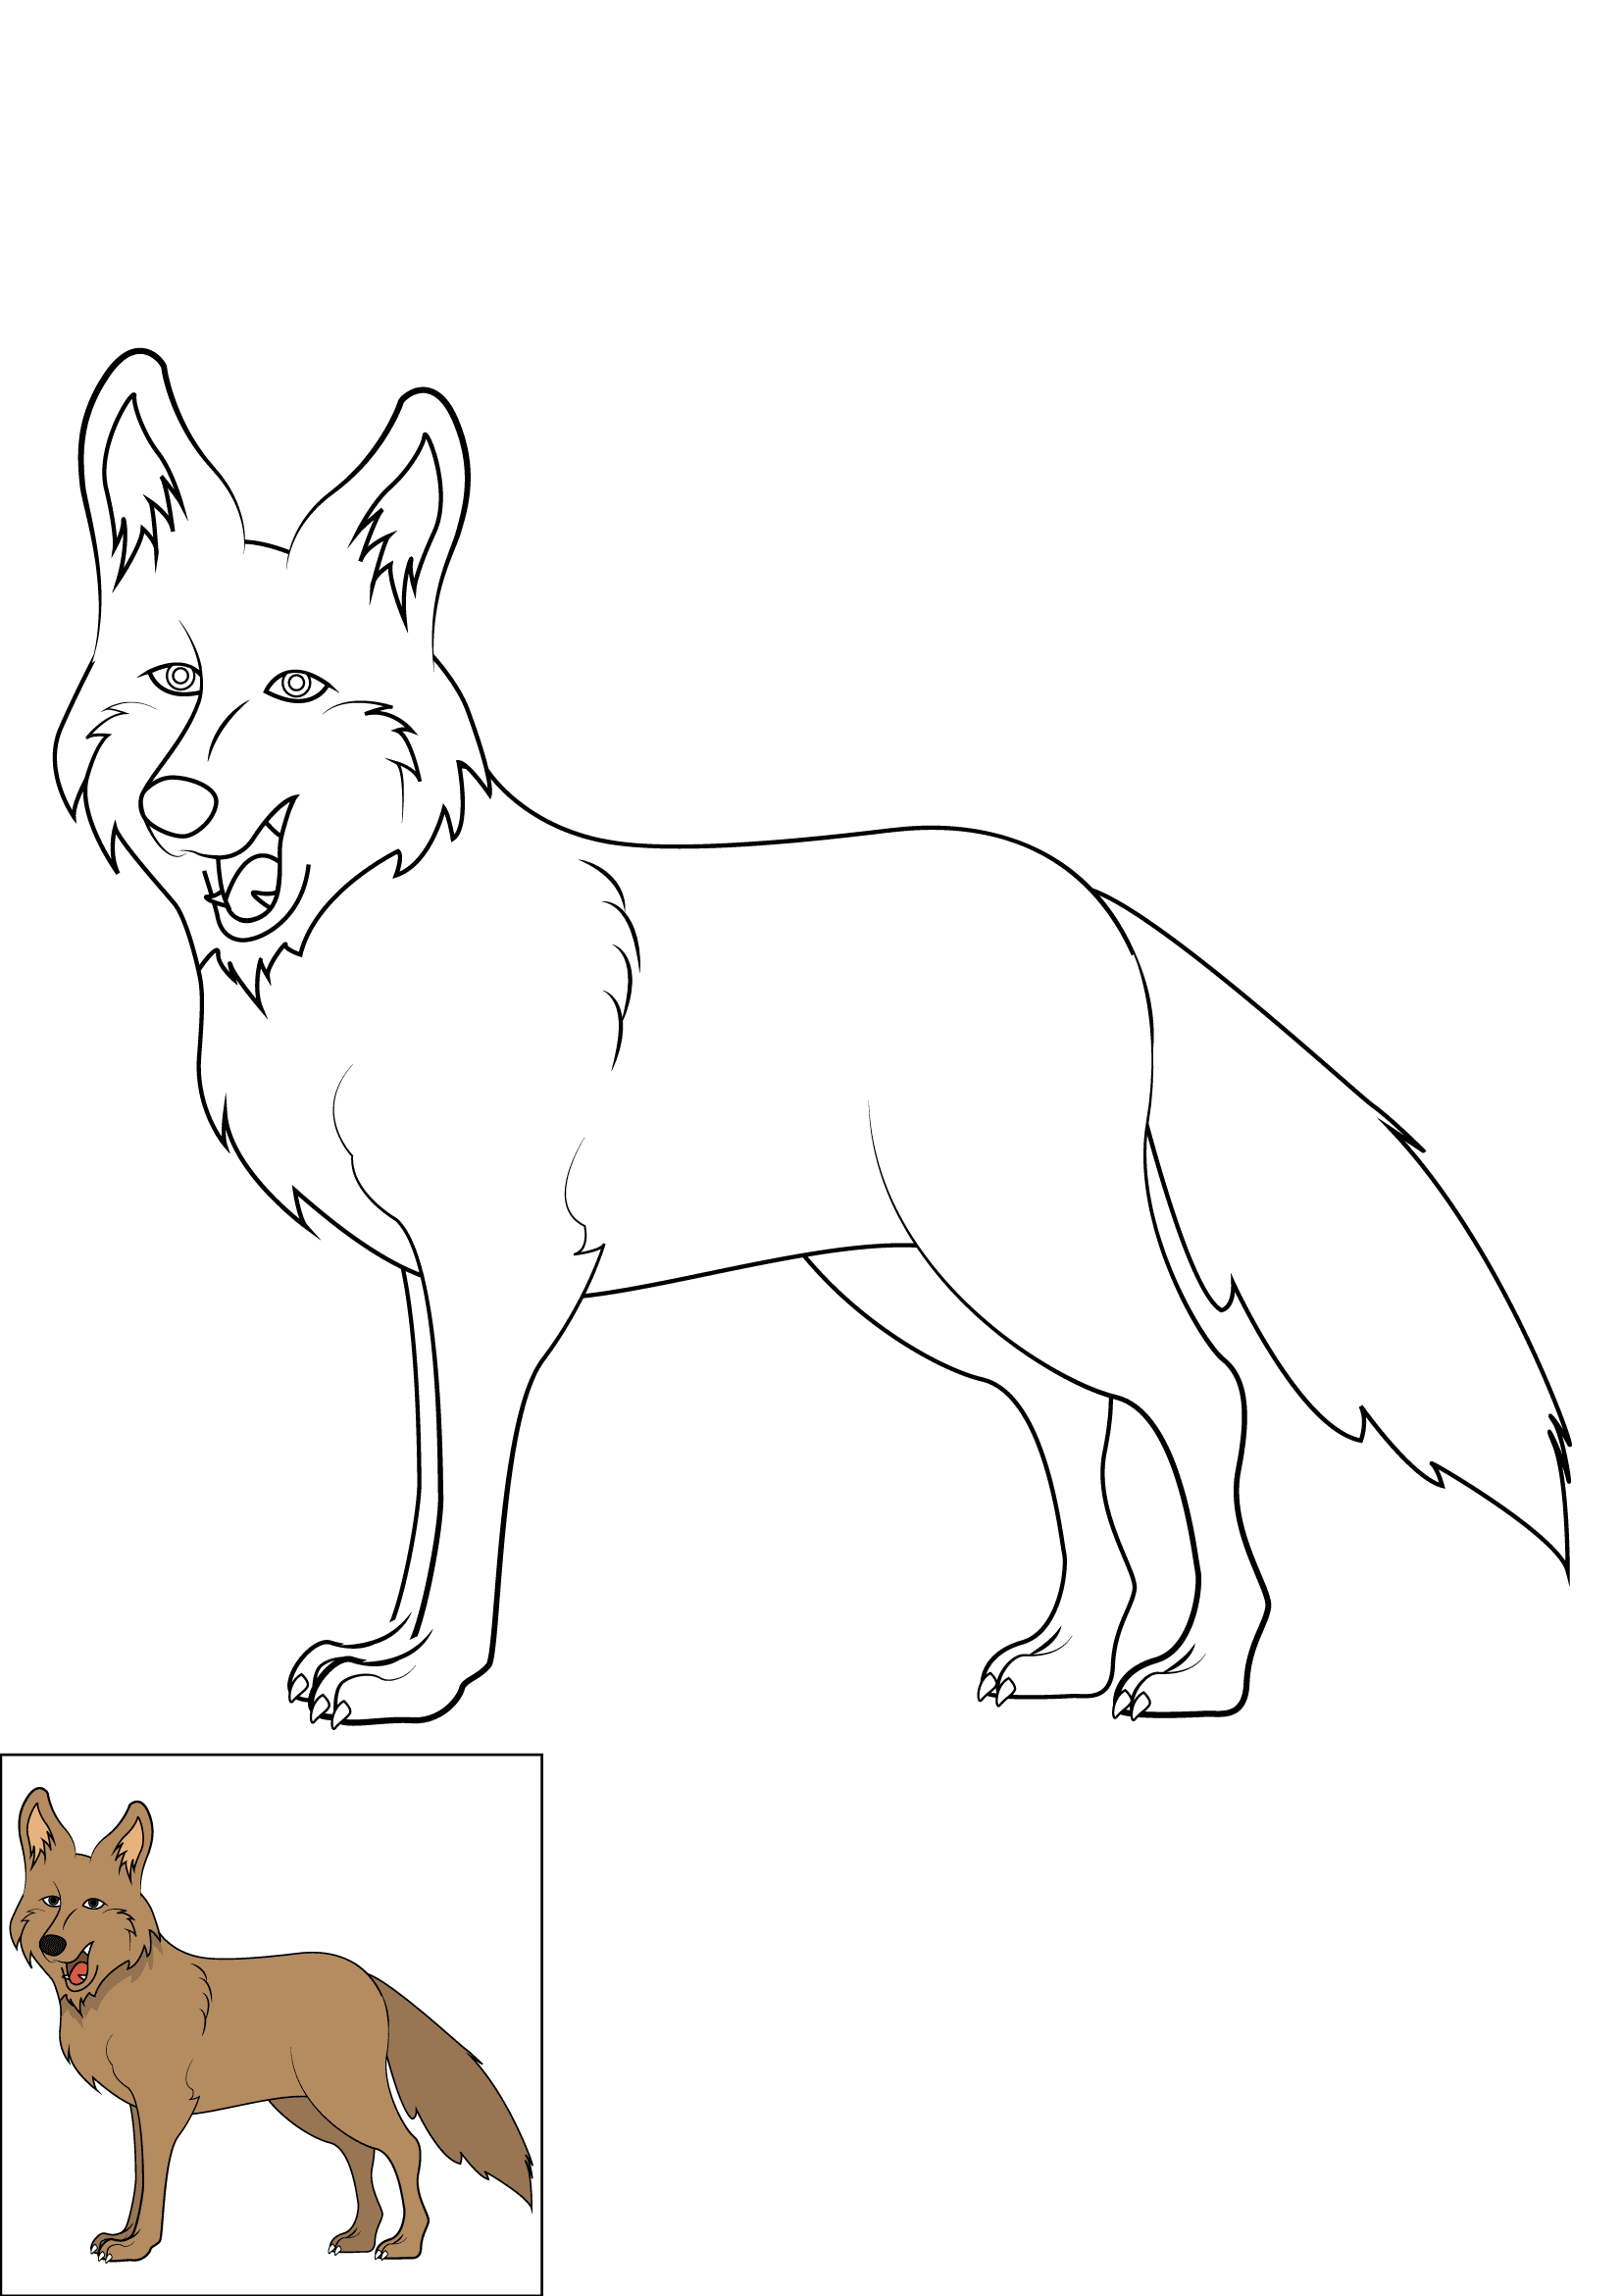 How to Draw A Coyote Step by Step Printable Color